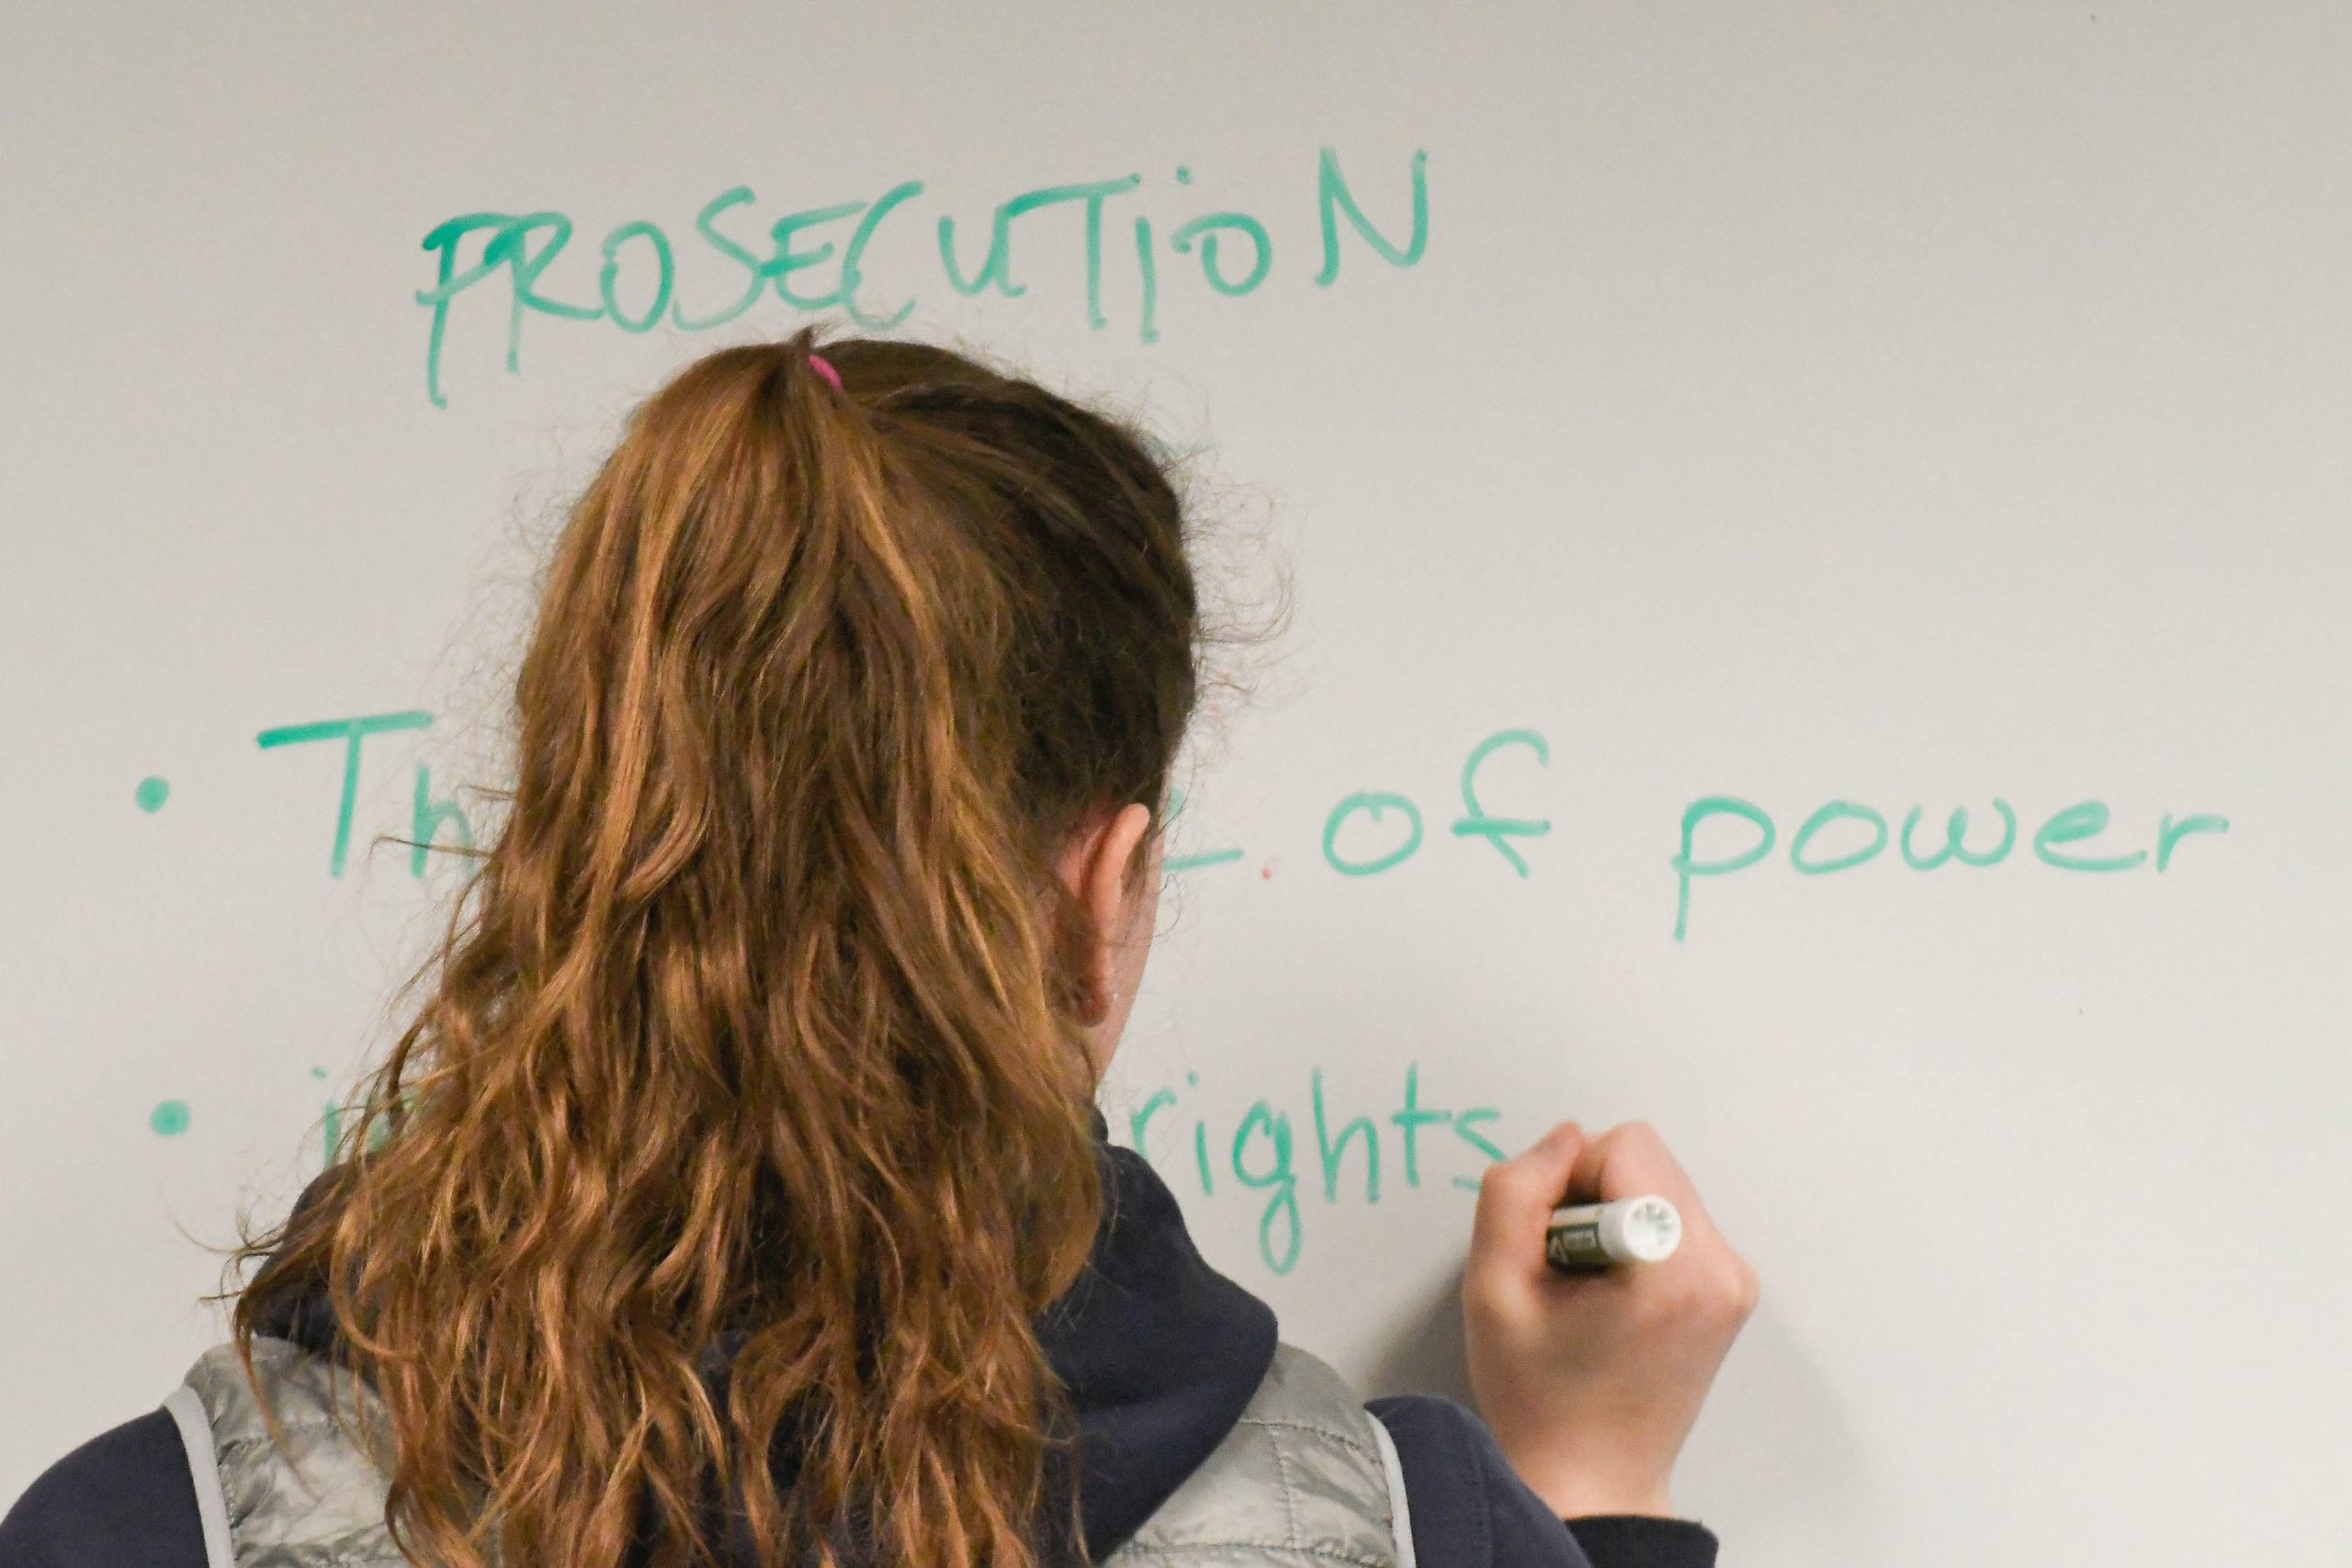 A student writing on a whiteboard.